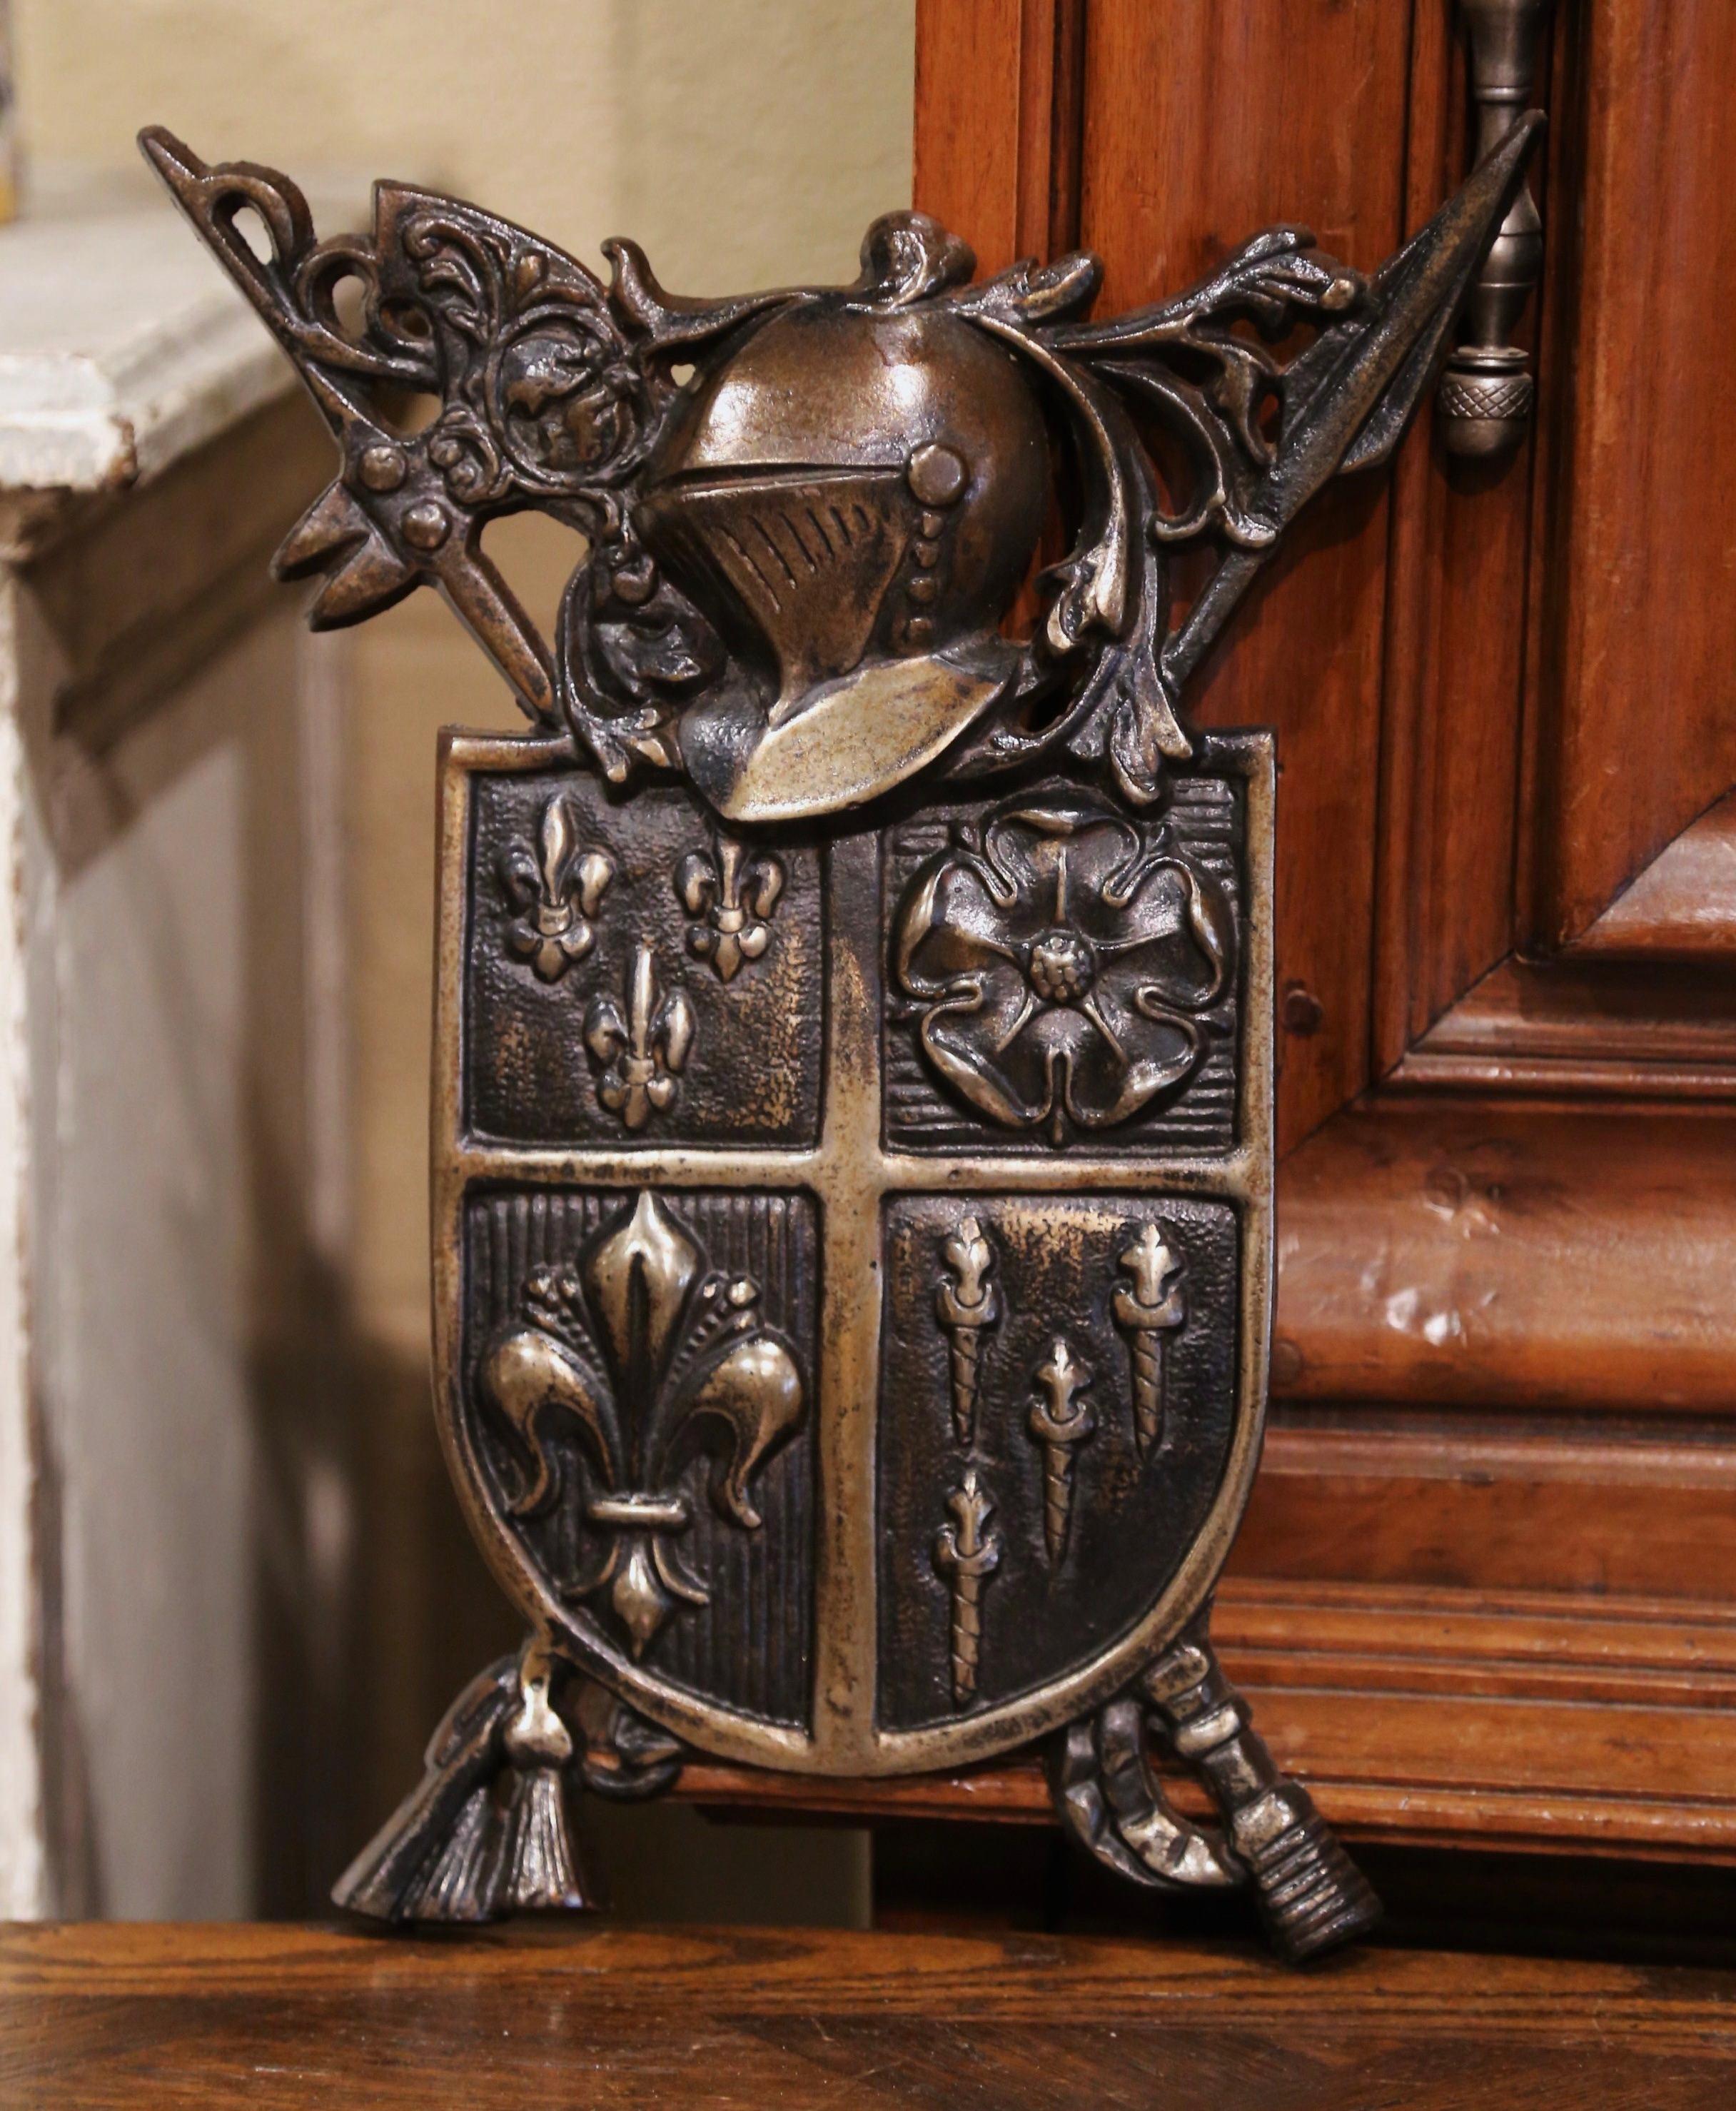 Hand-Carved 19th Century French Polished Iron Armorial Wall Plaque with Fleur-de-Lys Motifs